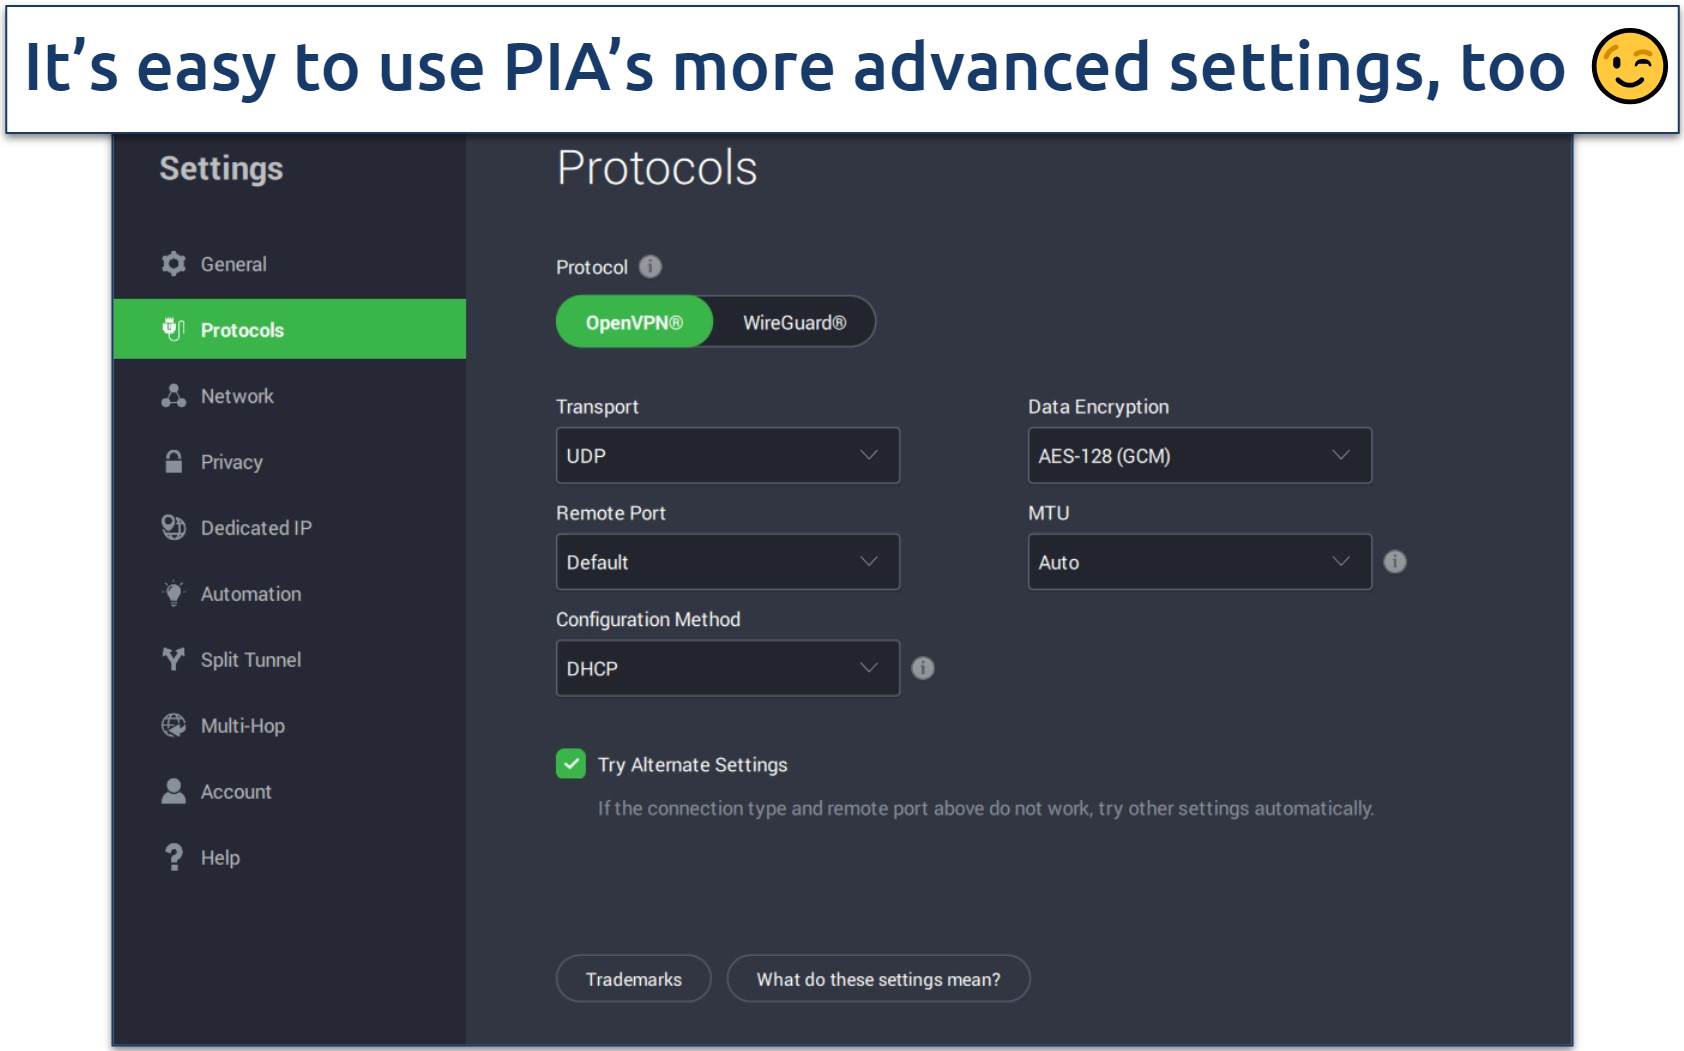 A screenshot of PIA's app interface with its advanced connection settings